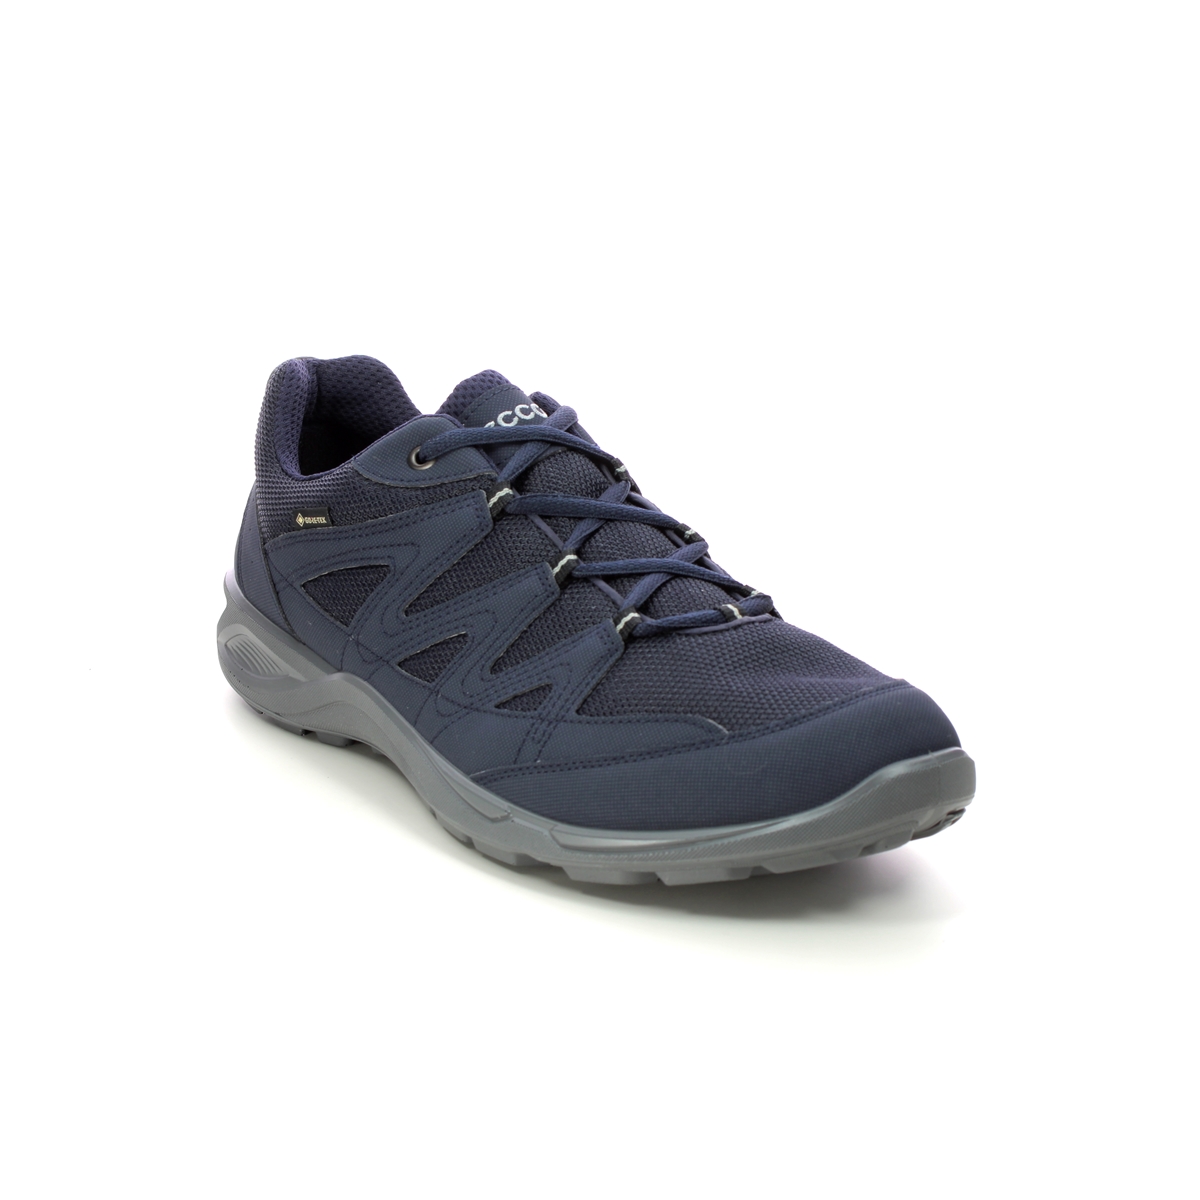 Ecco Terracruise Light Gtx Mens Navy Mens Trainers 825784-50769 In Size 43 In Plain Navy